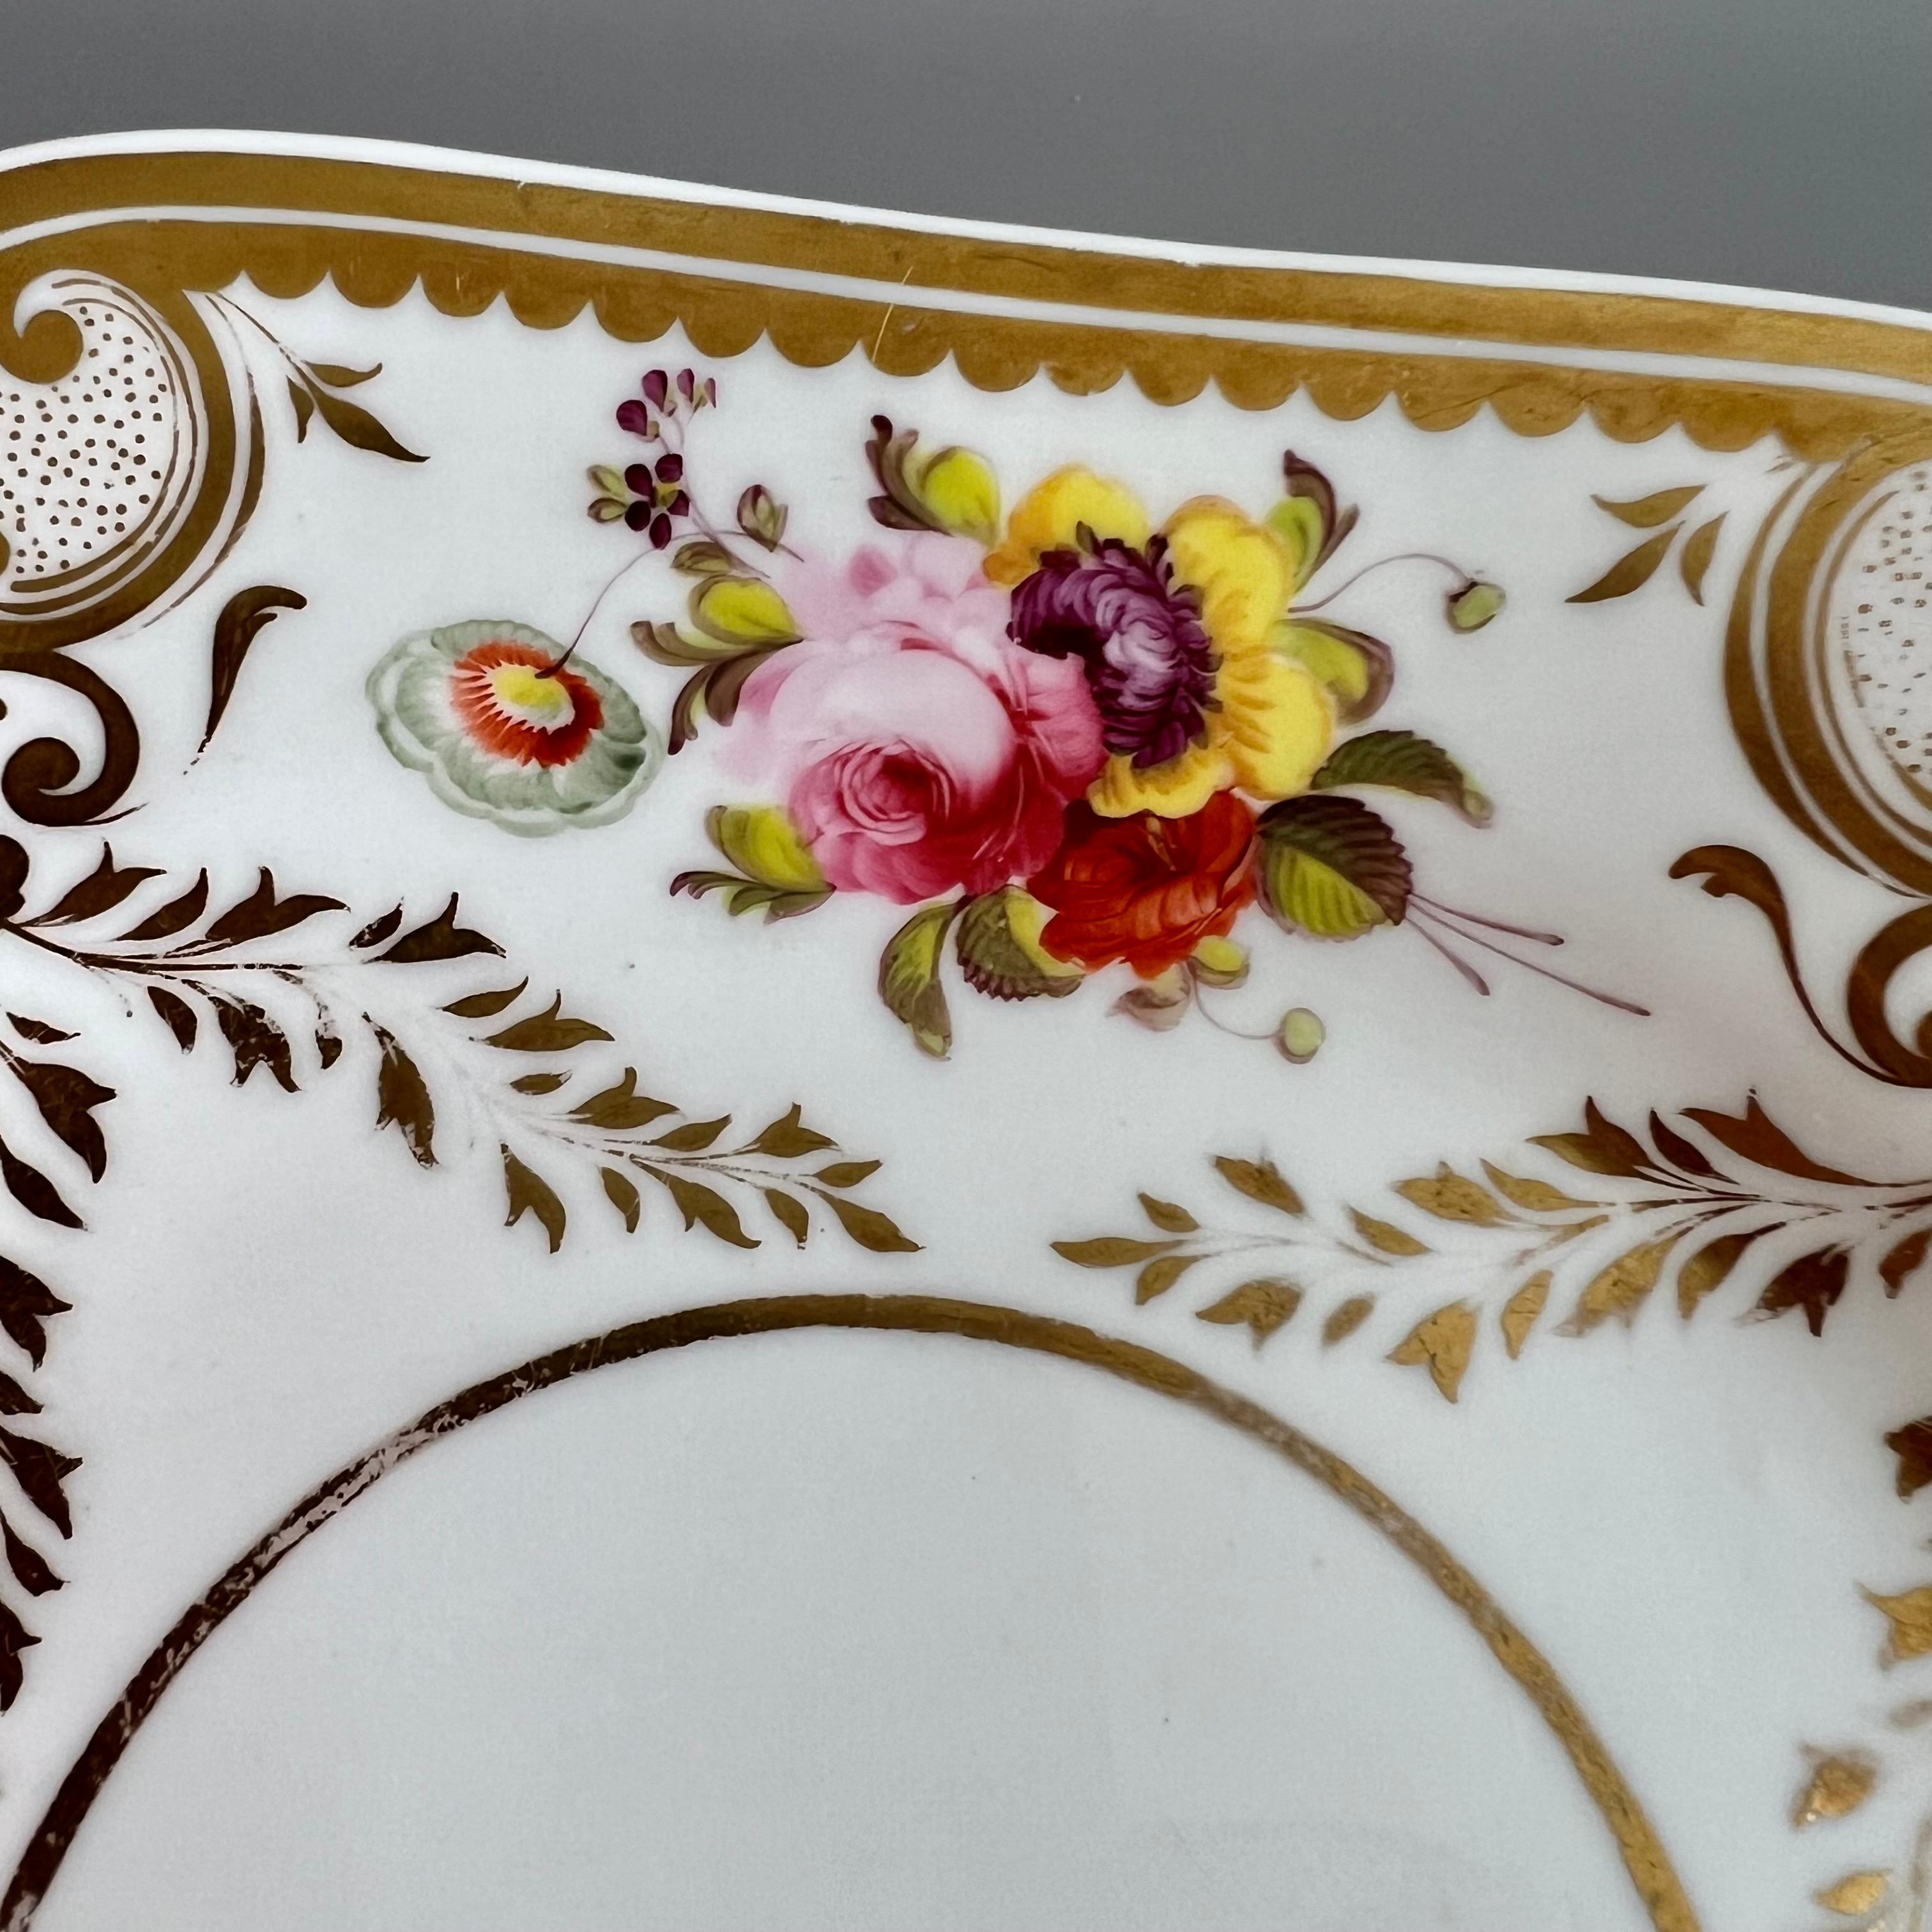 H&R Daniel Plate, White, Floral, Etruscan Shape, Regency, circa 1825 In Good Condition For Sale In London, GB